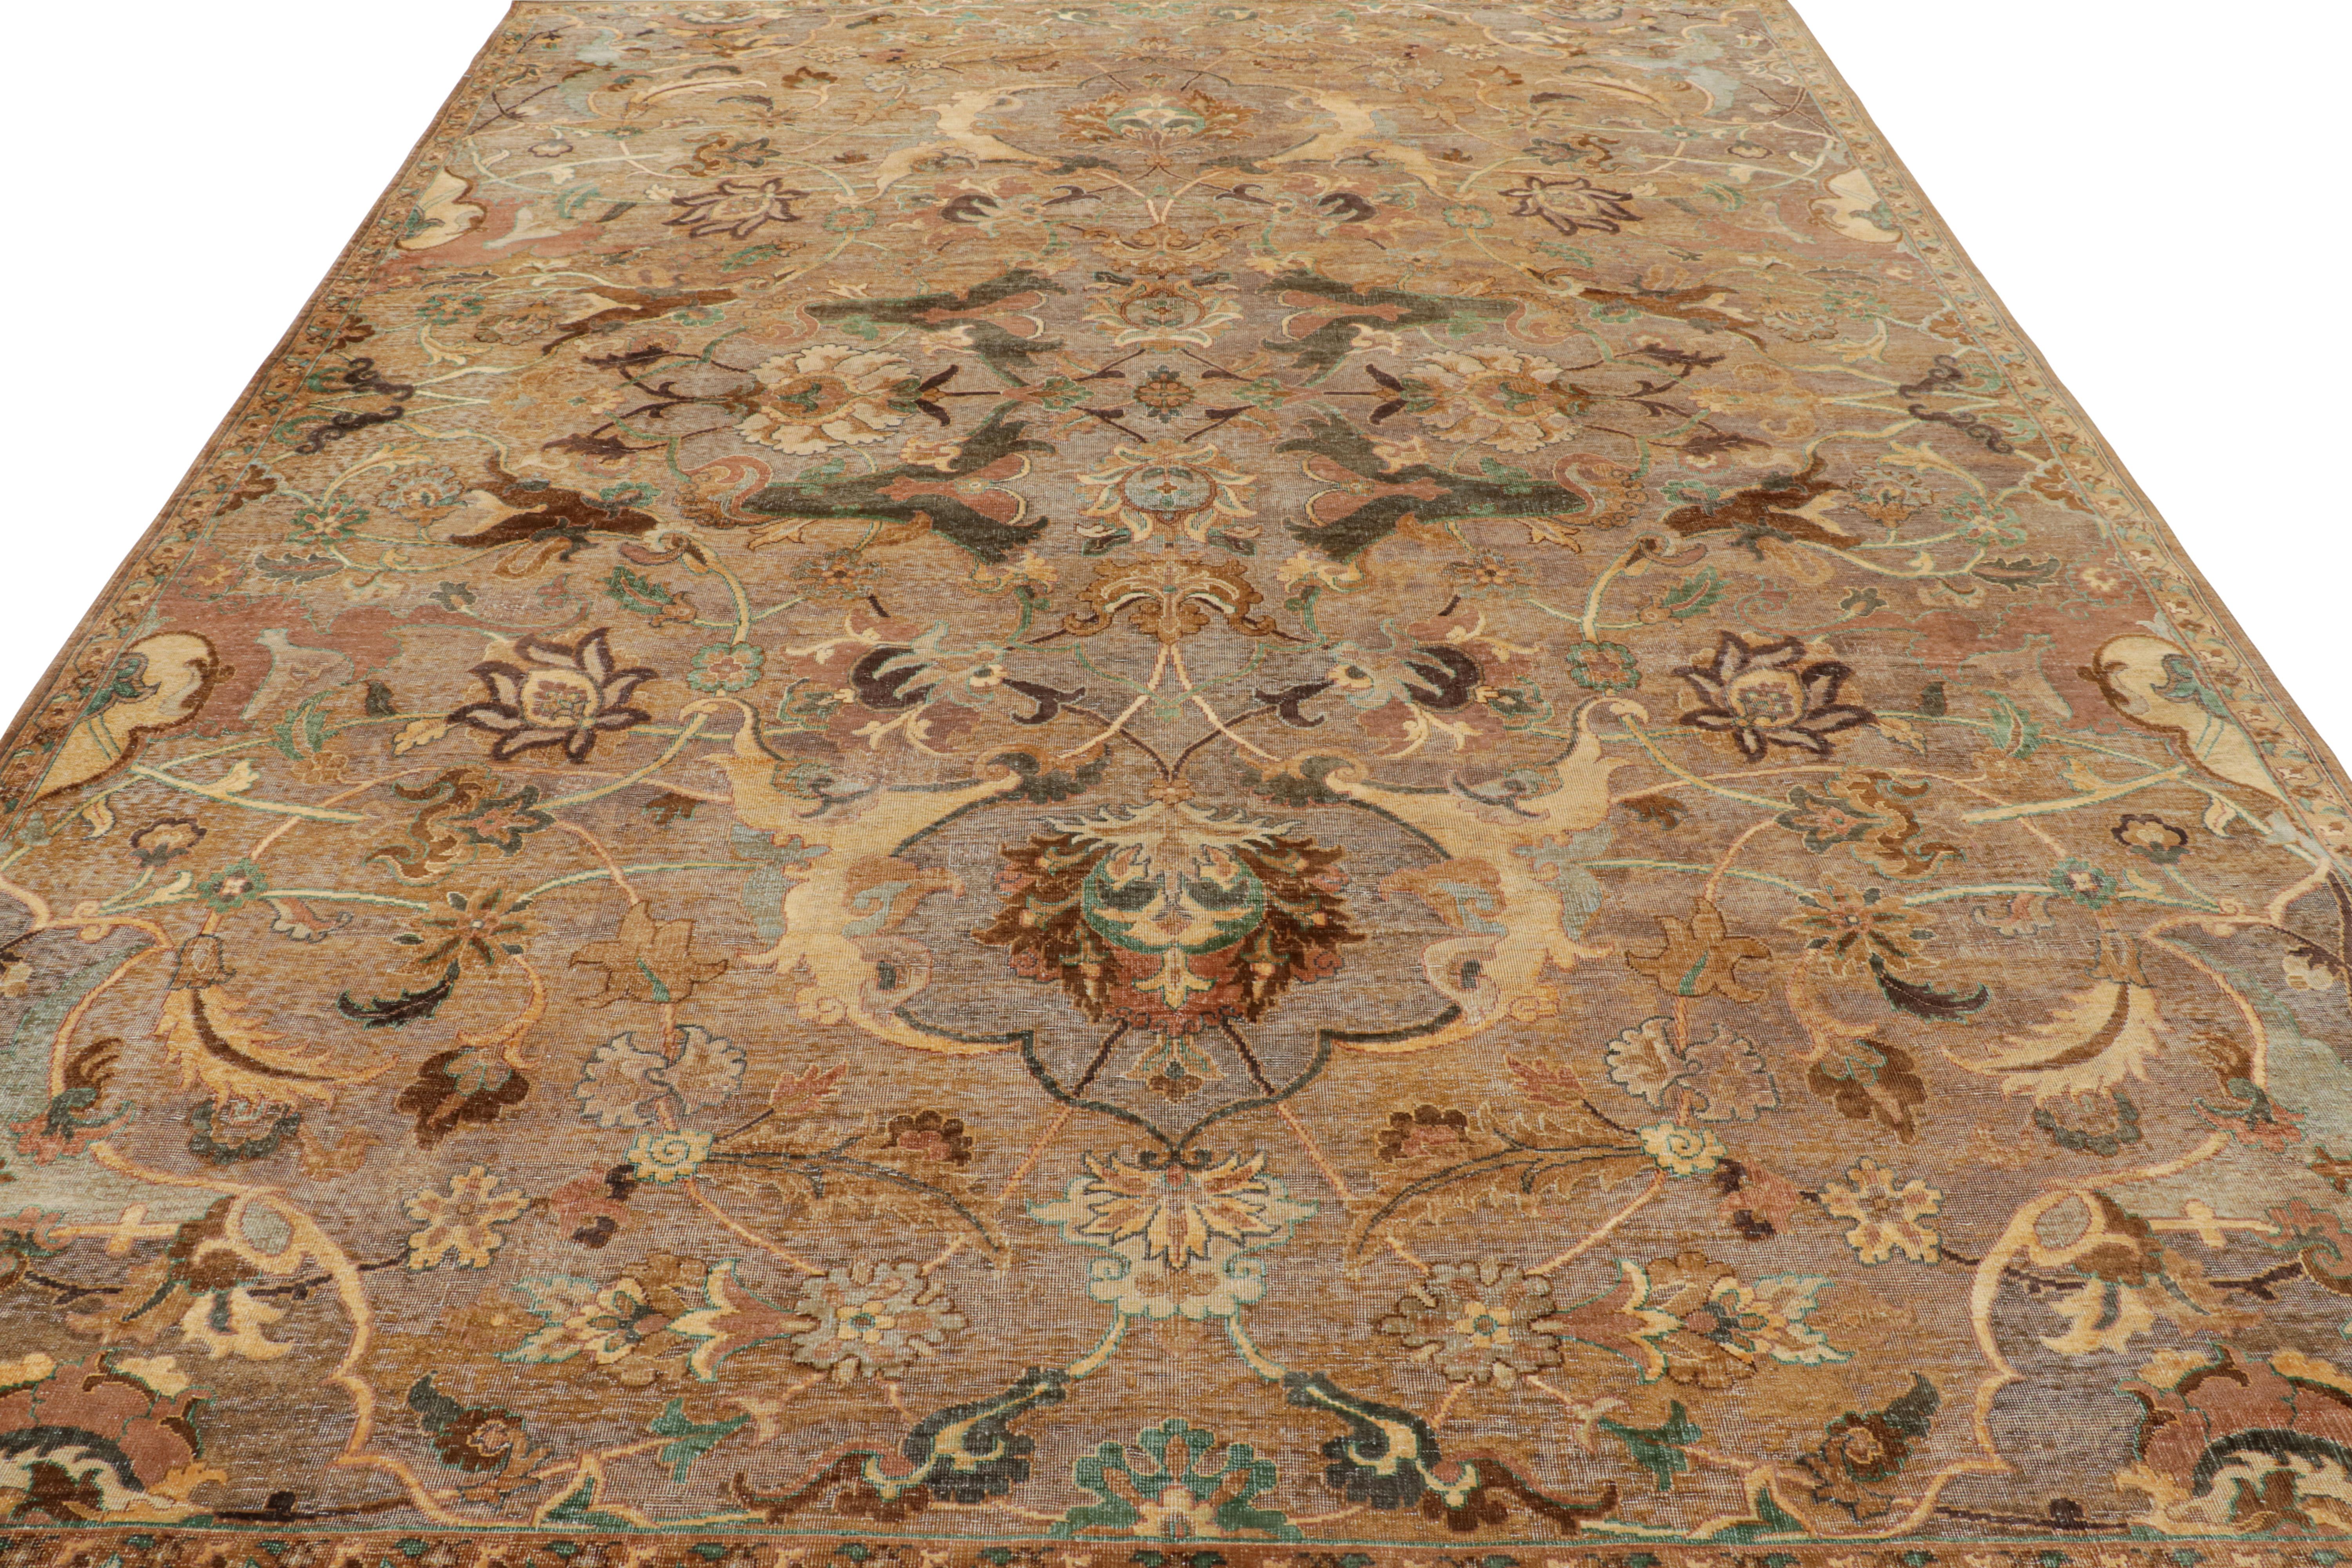 Rug & Kilim’s Polonaise Style Rug in Beige-Brown with Floral Patterns In New Condition For Sale In Long Island City, NY